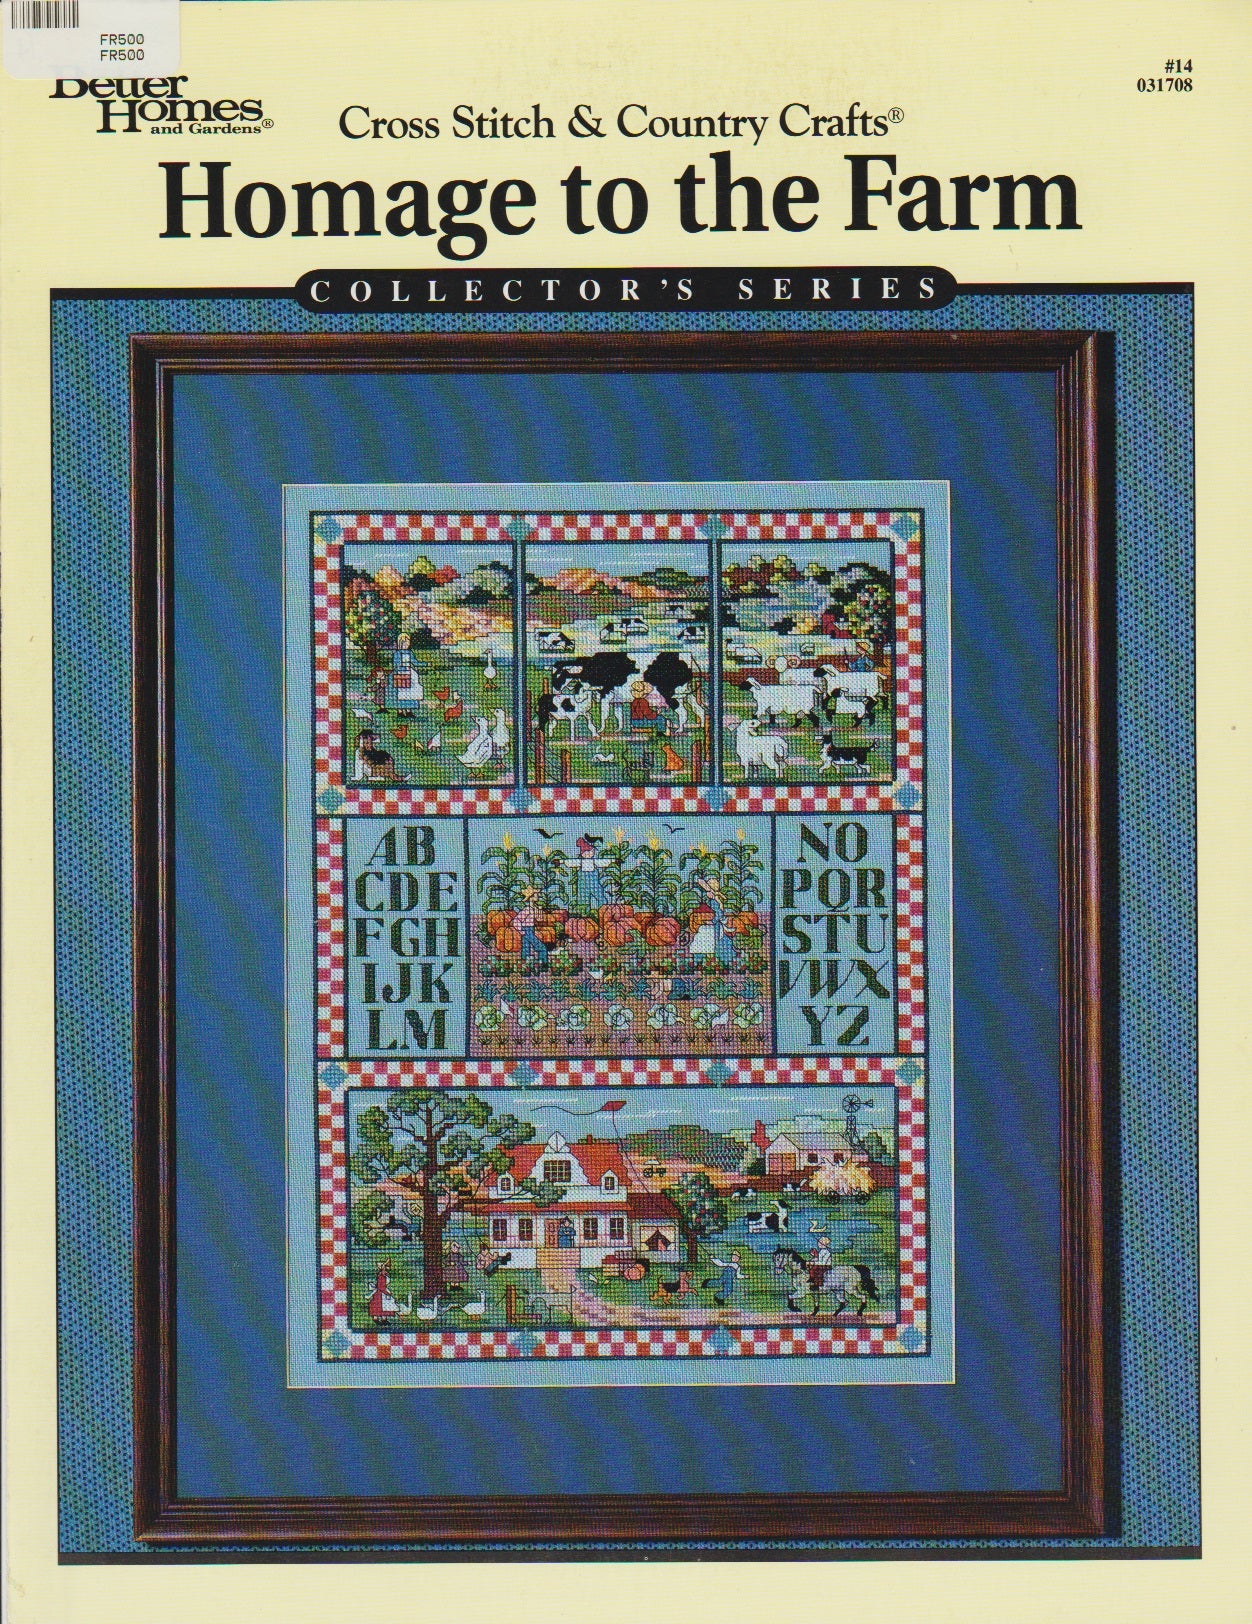 Cross Stitch & Country Crafts Homage to the Farm amish cross stitch pattern